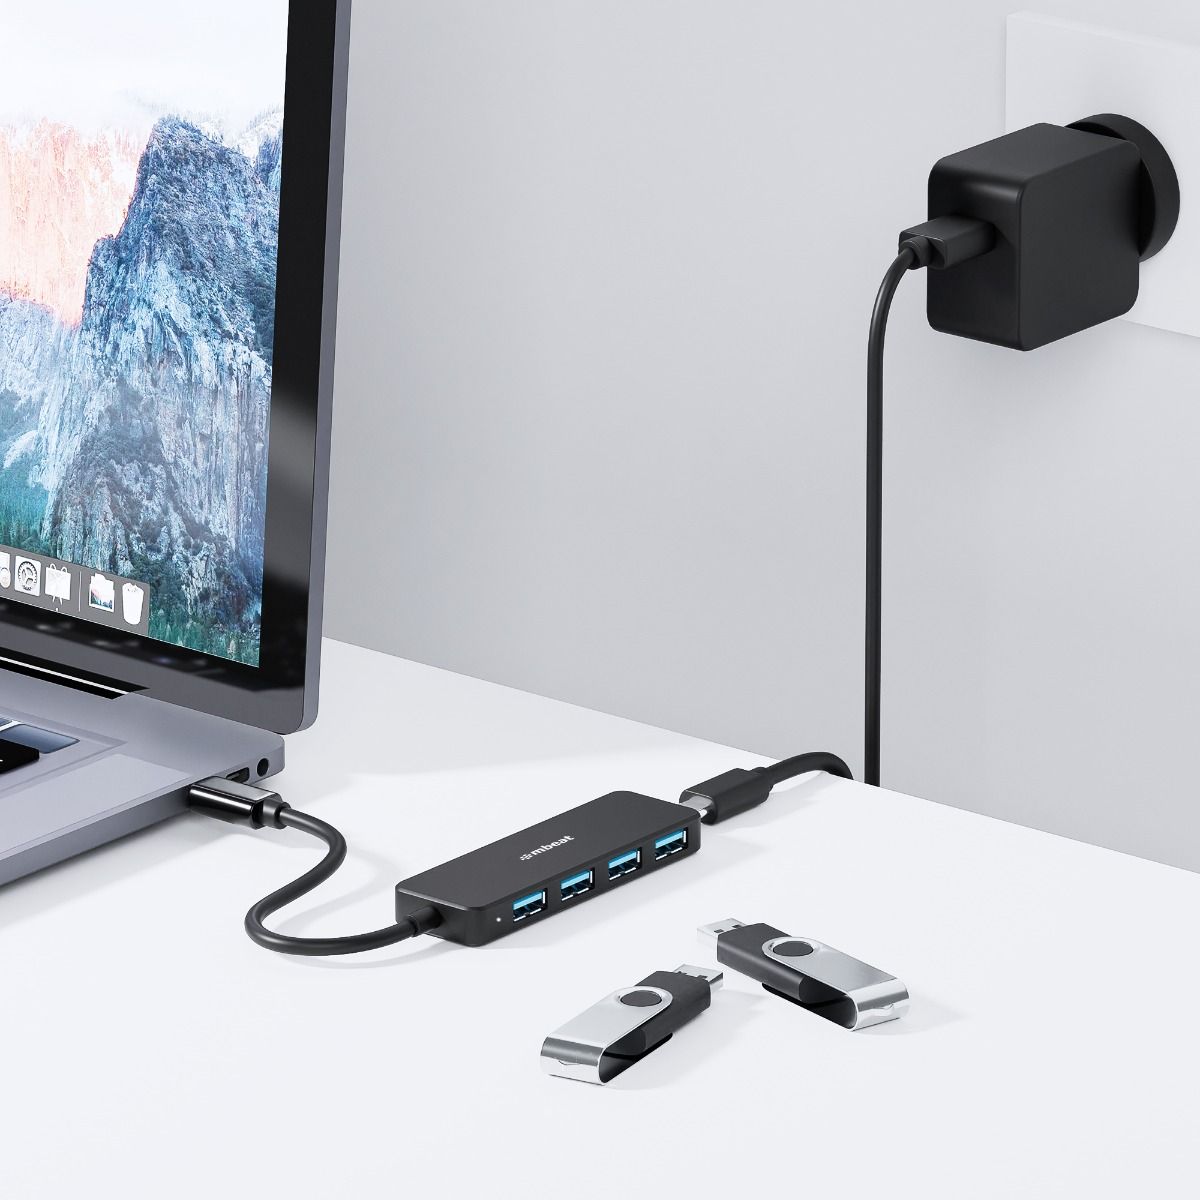 A large marketing image providing additional information about the product mBeat 4-Port USB-C Hub with USB-C DC Port - Additional alt info not provided